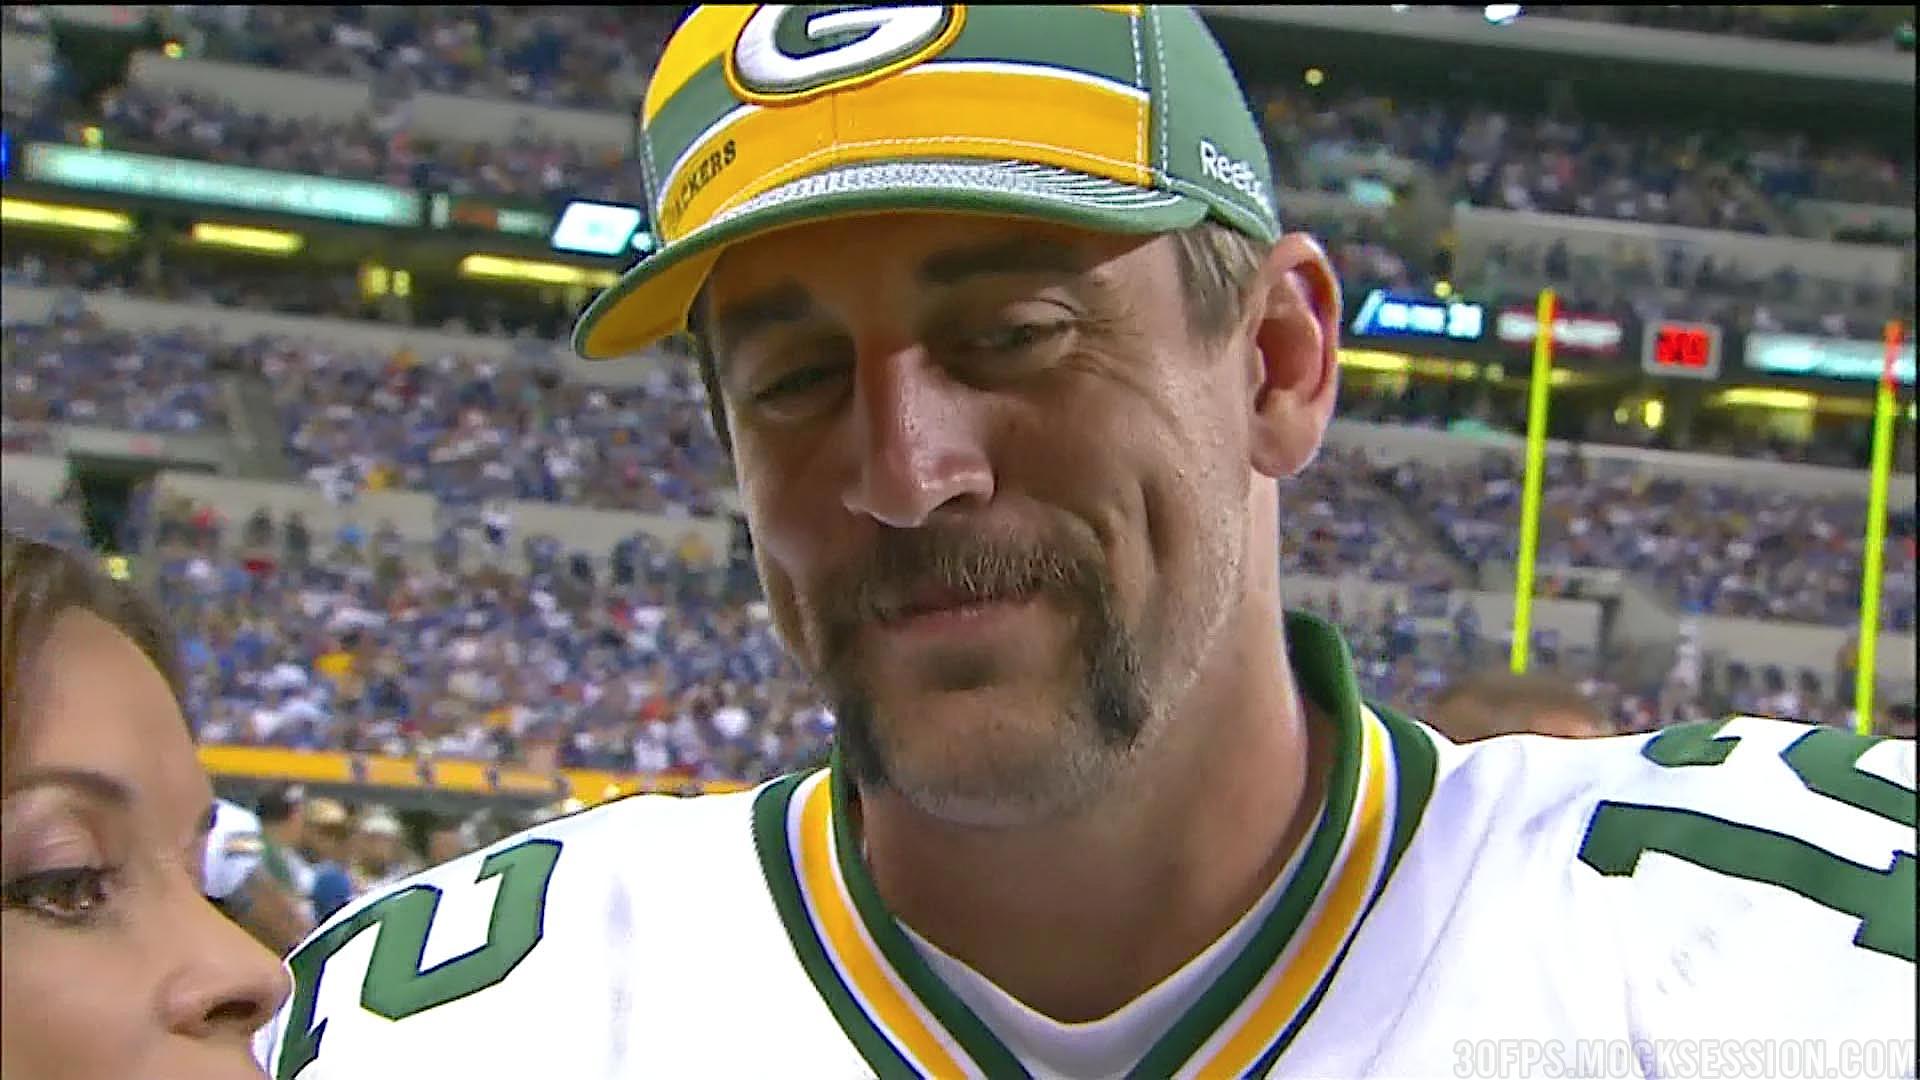 I'll see your Ryan Fitzpatrick, and raise you an Aaron Rodgers #BestNFLfacialhair